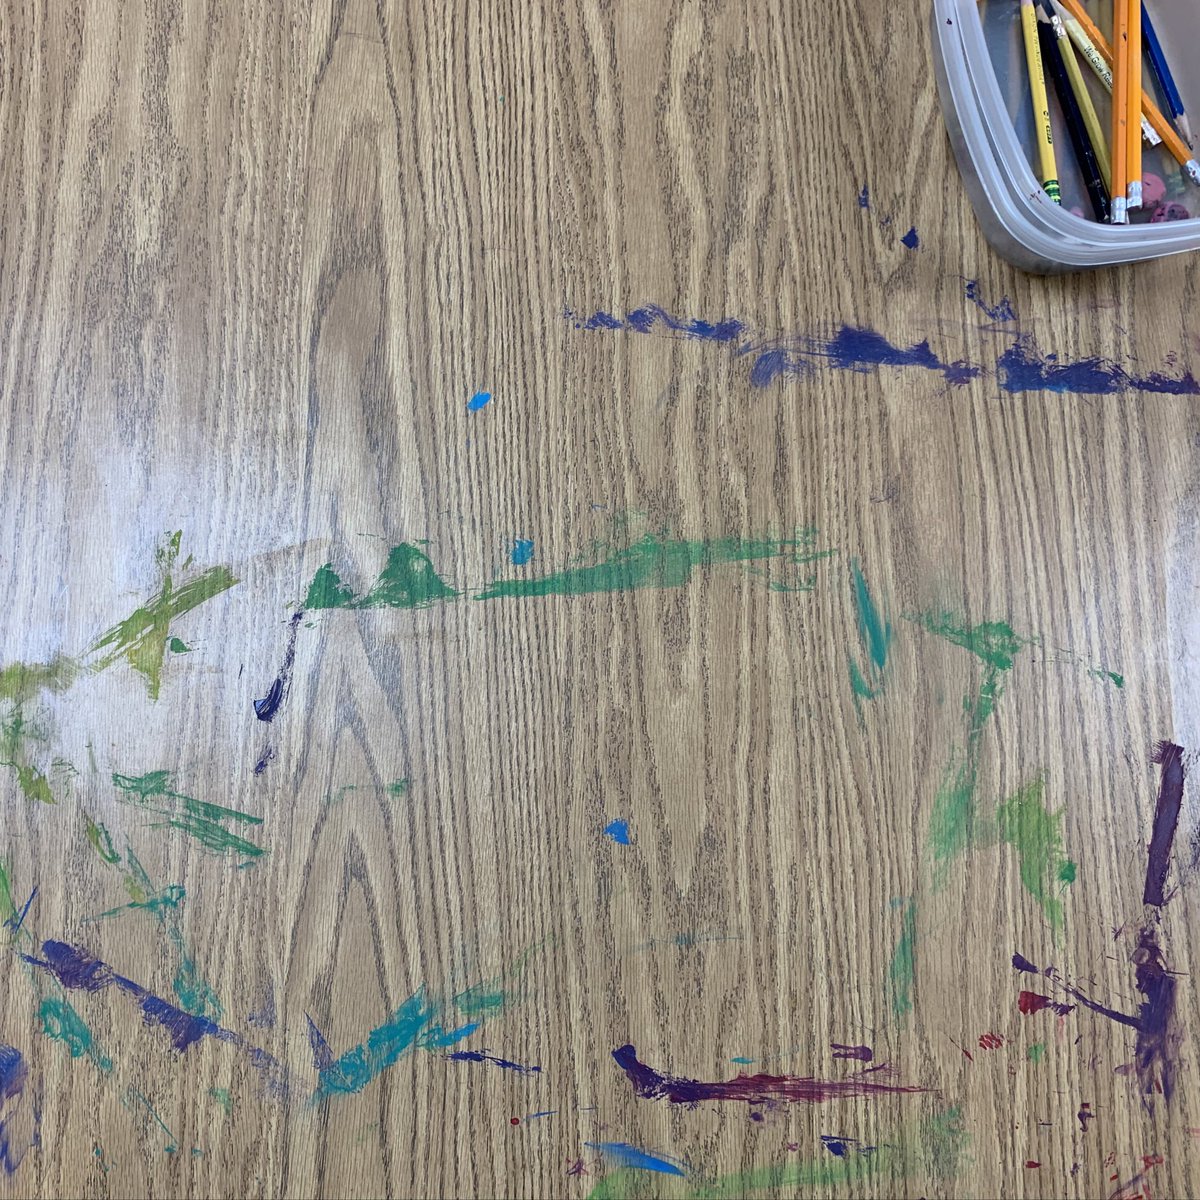 This kind of mess makes me so happy…it means our artists are painting. #KWBpride